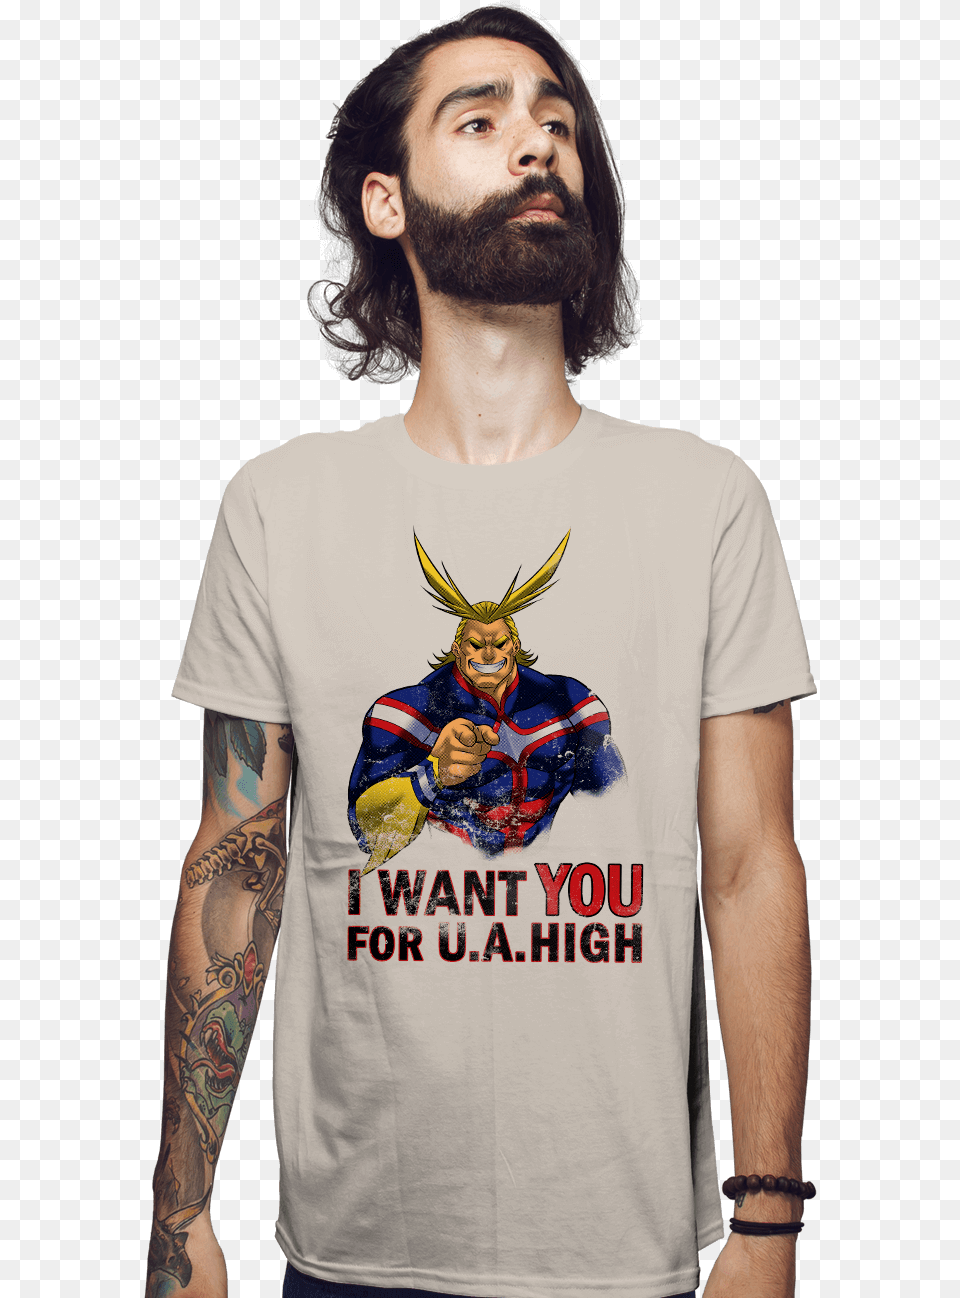 Uncle All Might Want You For Us Army Bob Newby Superhero Shirt, Tattoo, T-shirt, Clothing, Skin Png